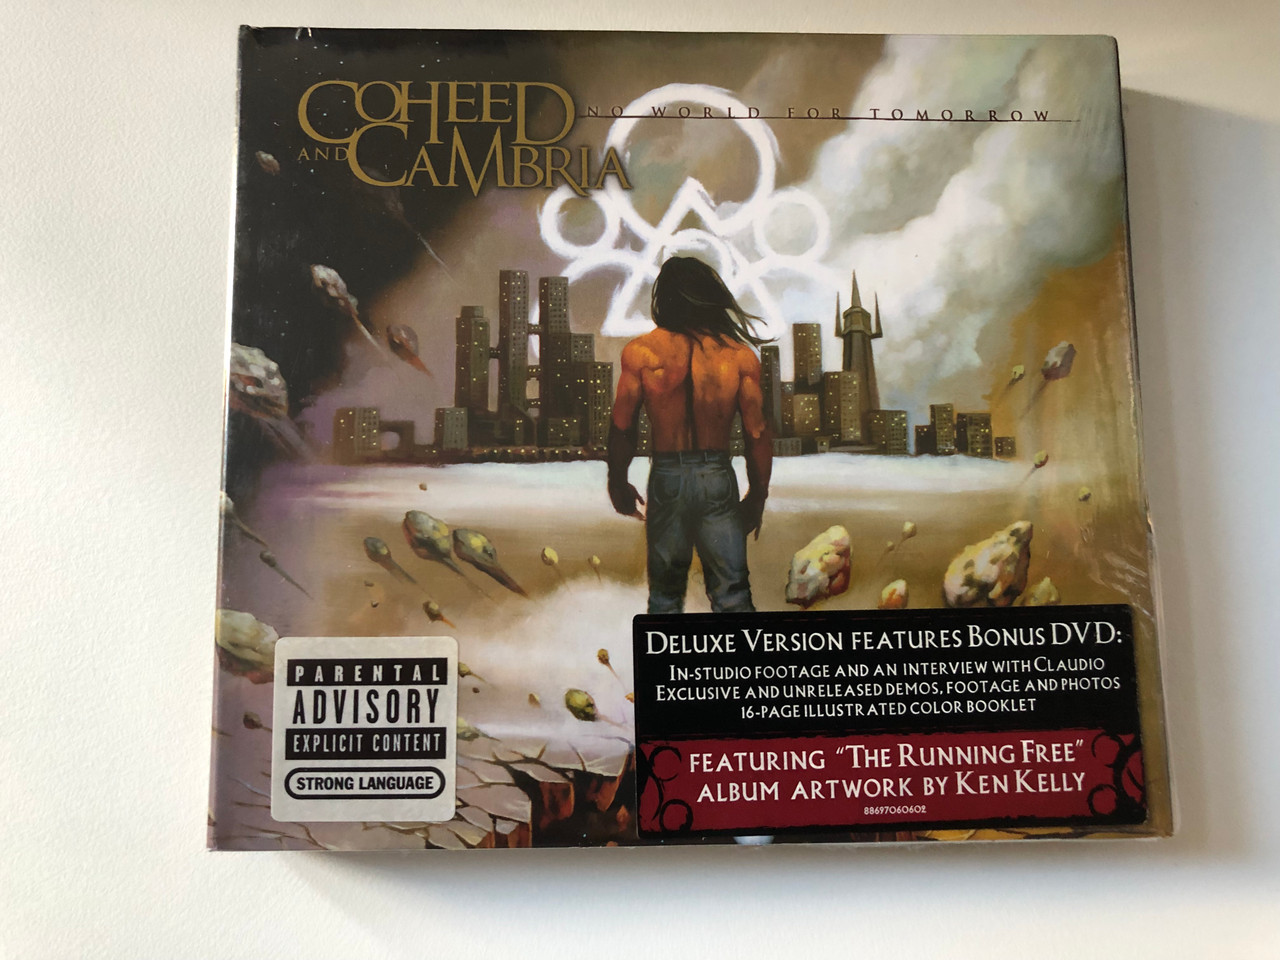 https://cdn10.bigcommerce.com/s-62bdpkt7pb/products/0/images/200660/Coheed_And_Cambria_No_World_For_Tomorrow_Deluxe_Version_Features_Bonus_DVD_In-Studio_Footage_And_An_Interview_With_Claudio_Featuring_The_Running_Free_Album_Artwork_By_Ken_Kelly_Colum_1__46835.1638185425.1280.1280.JPG?c=2&_gl=1*1s8resz*_ga*MjA2NTIxMjE2MC4xNTkwNTEyNTMy*_ga_WS2VZYPC6G*MTYzODE3MTM4NC4xOTMuMS4xNjM4MTg0NjQ0LjE2